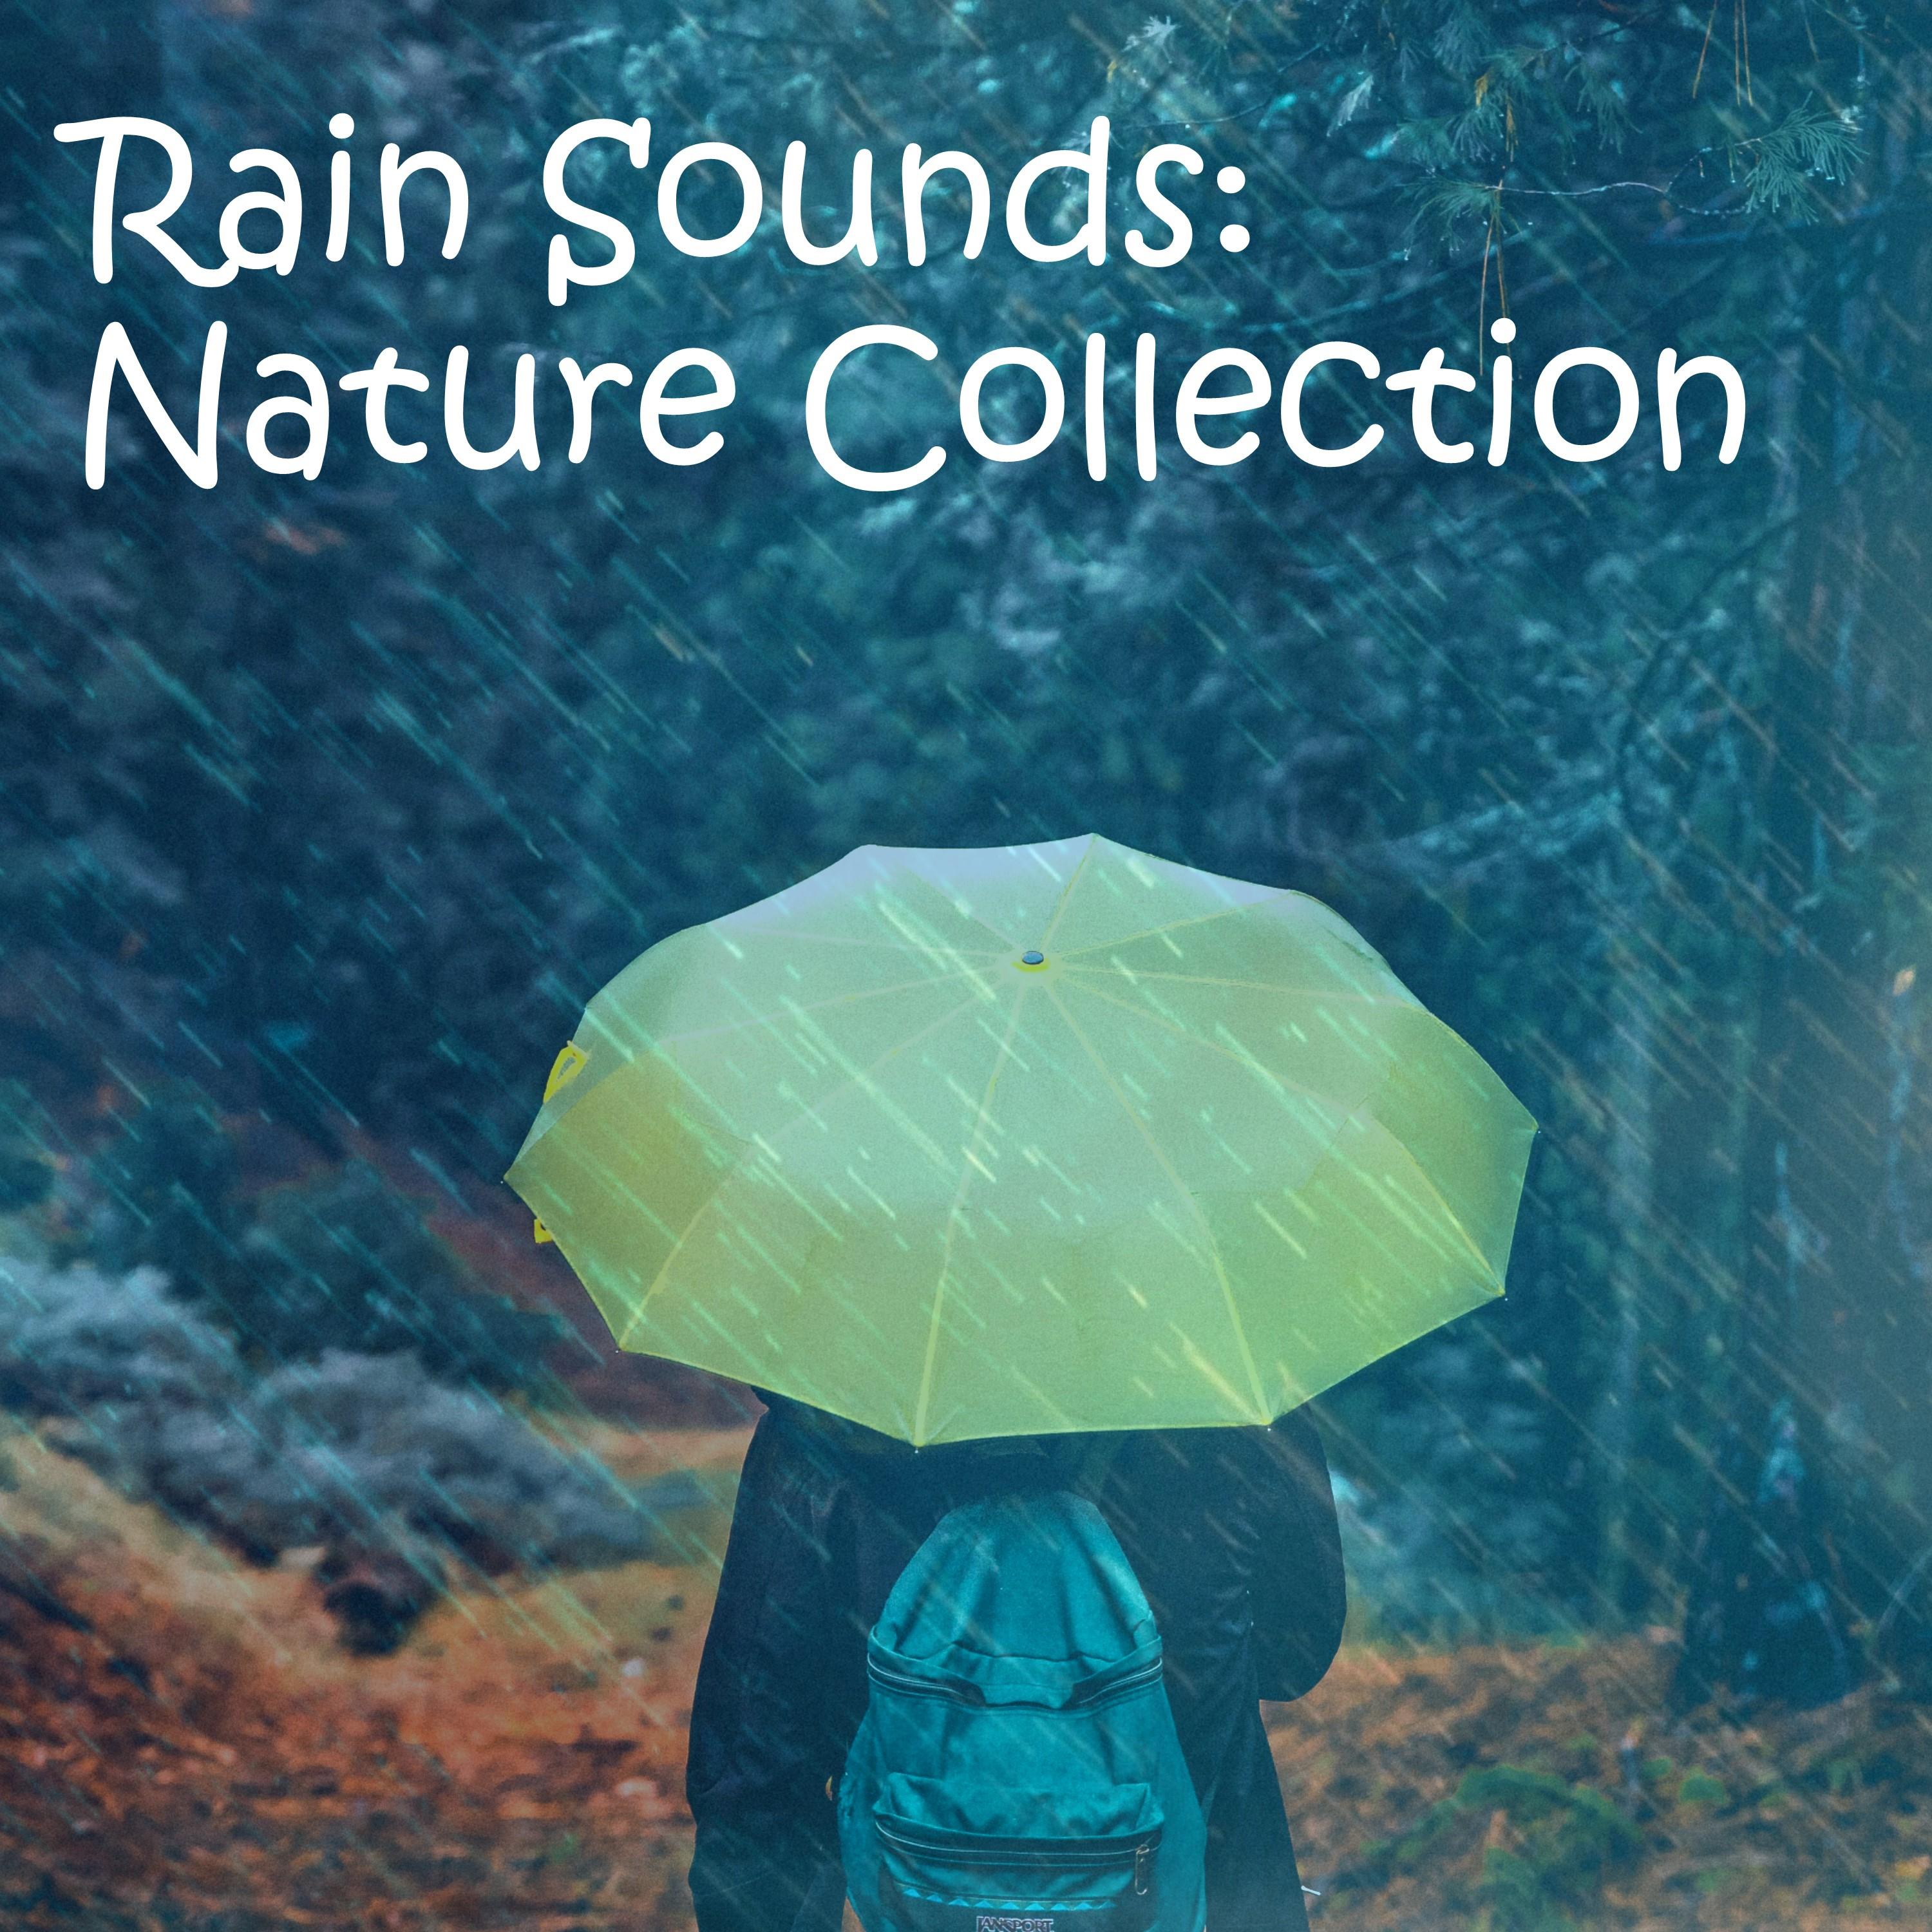 18 Sounds of Rain and Nature to Aid Meditation and Reduce Stress